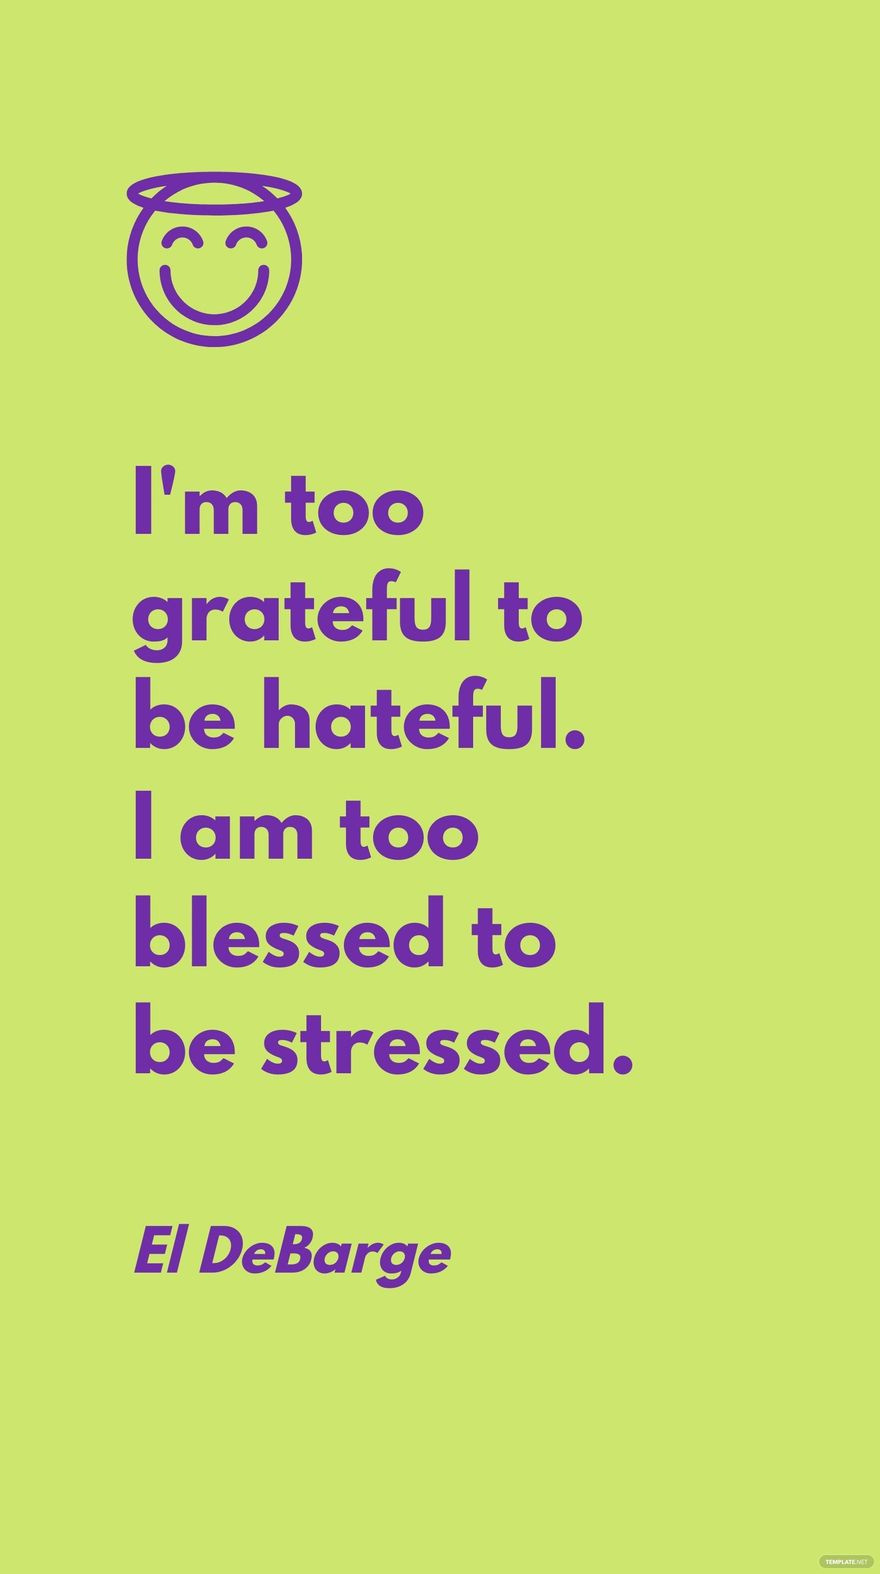 Free El DeBarge - I'm too grateful to be hateful. I am too blessed to be stressed. in JPG